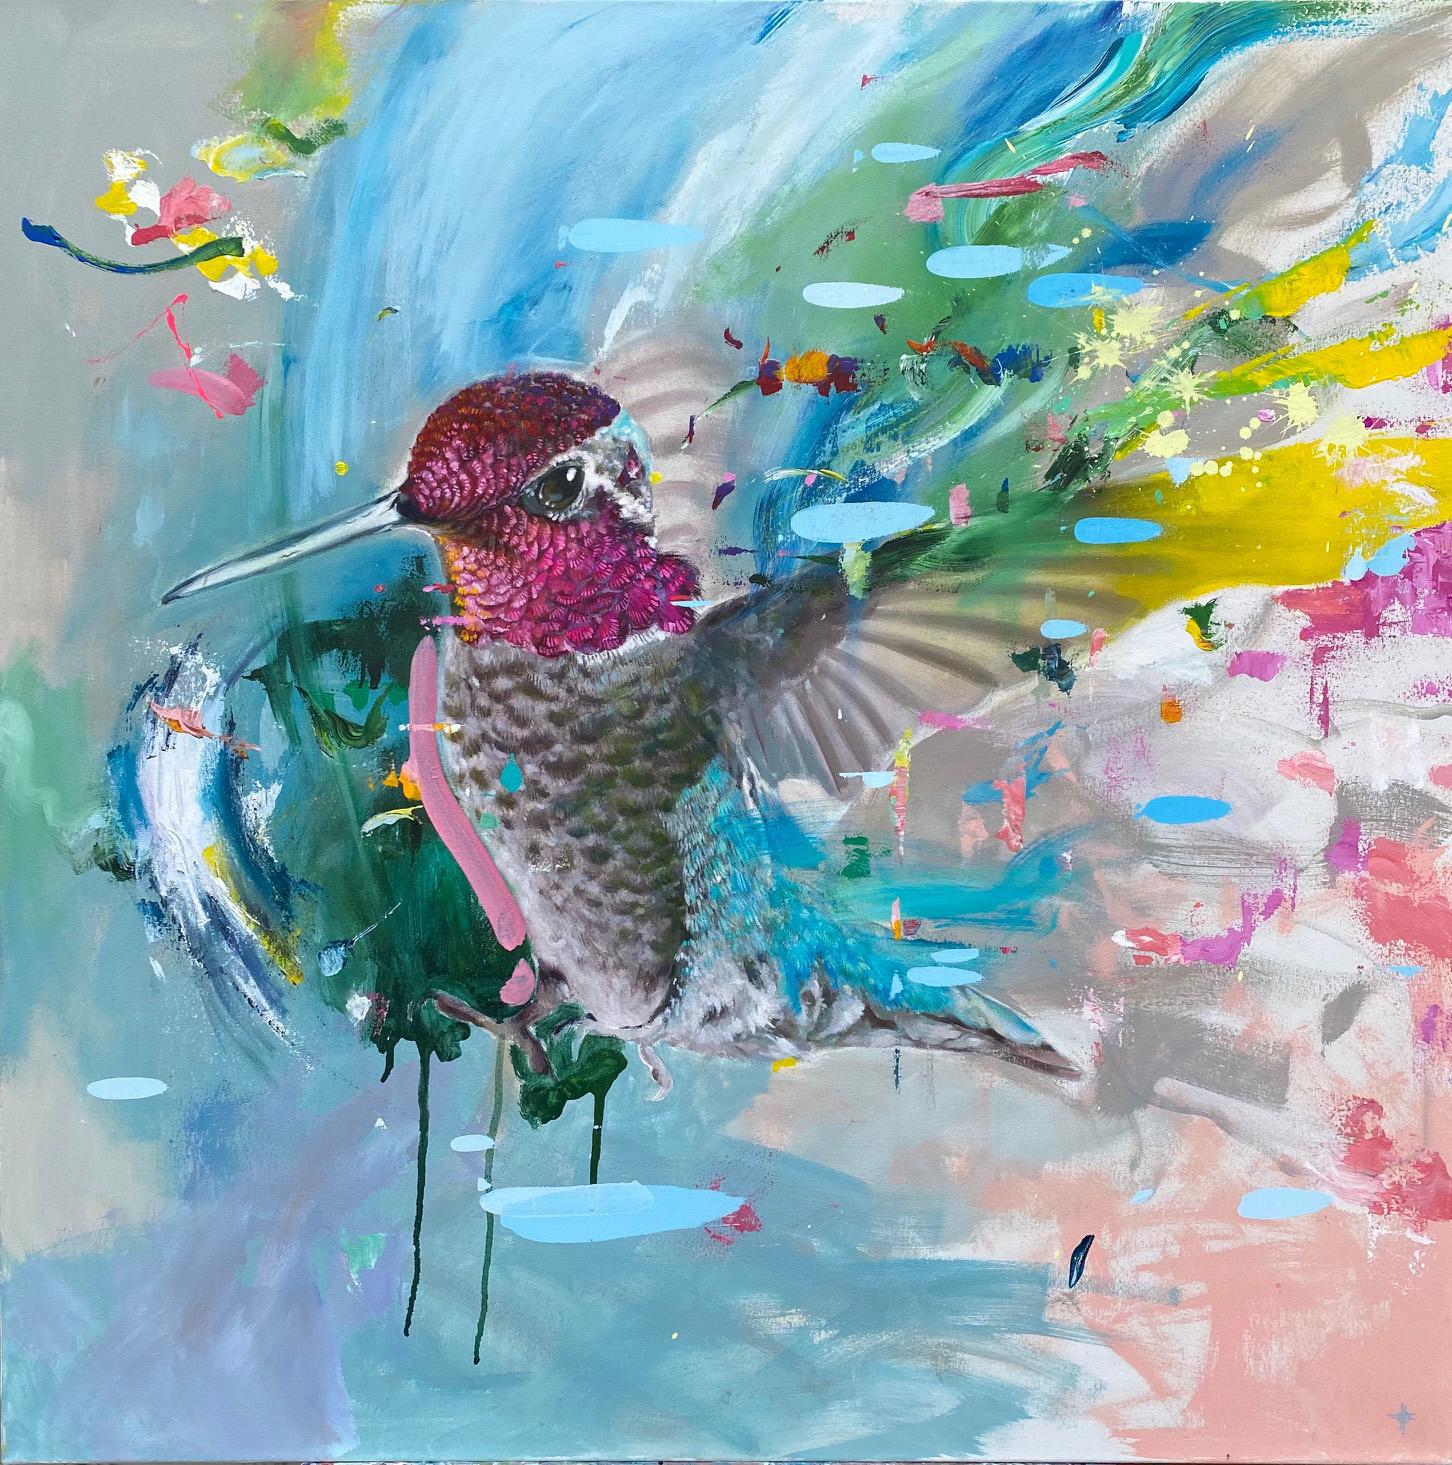 Keng Wai Lee Animal Painting - House of Hall - contemporary colourful hummingbird acrylic painting